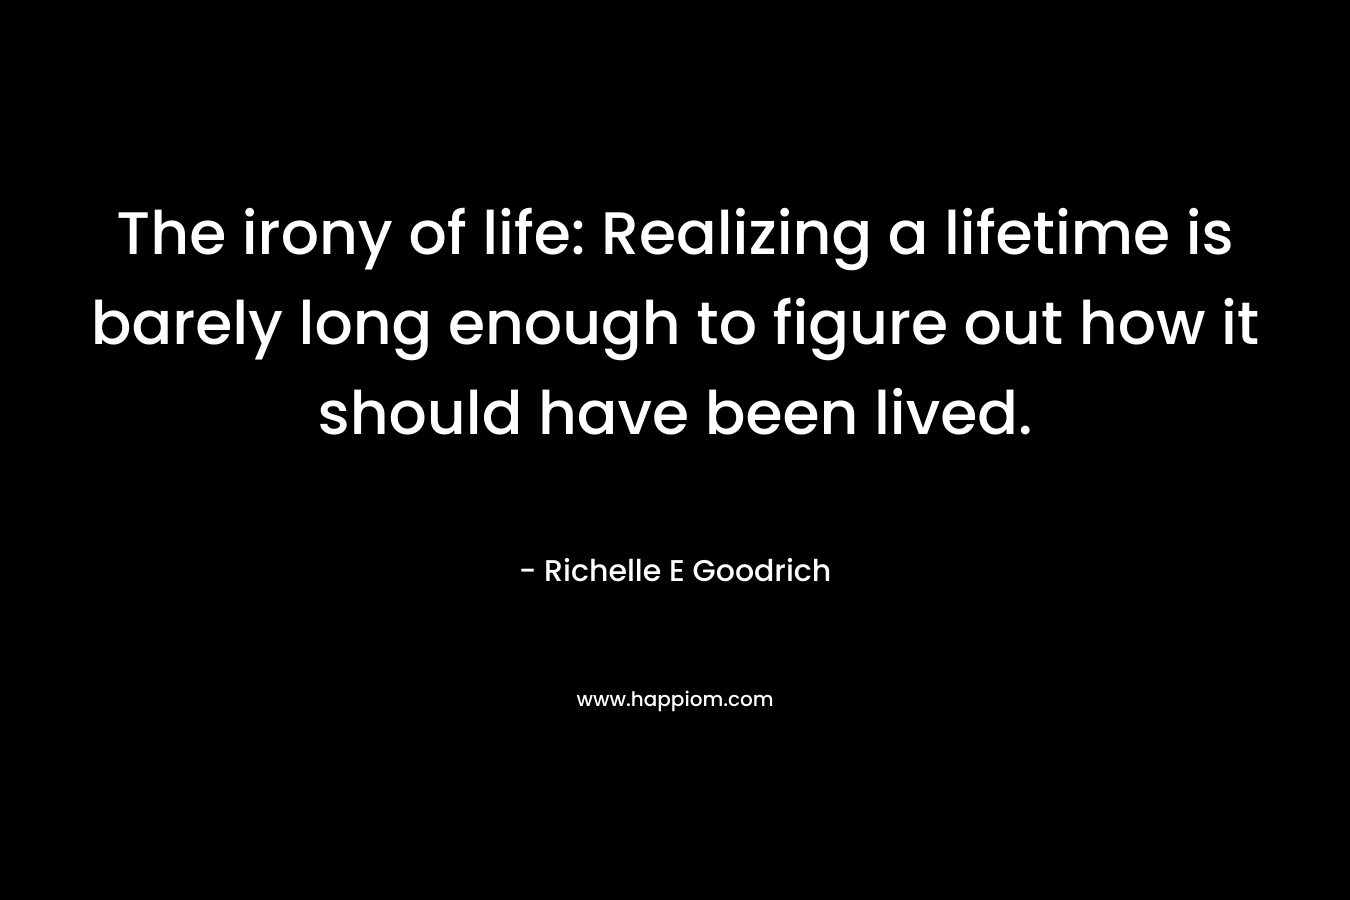 The irony of life: Realizing a lifetime is barely long enough to figure out how it should have been lived.